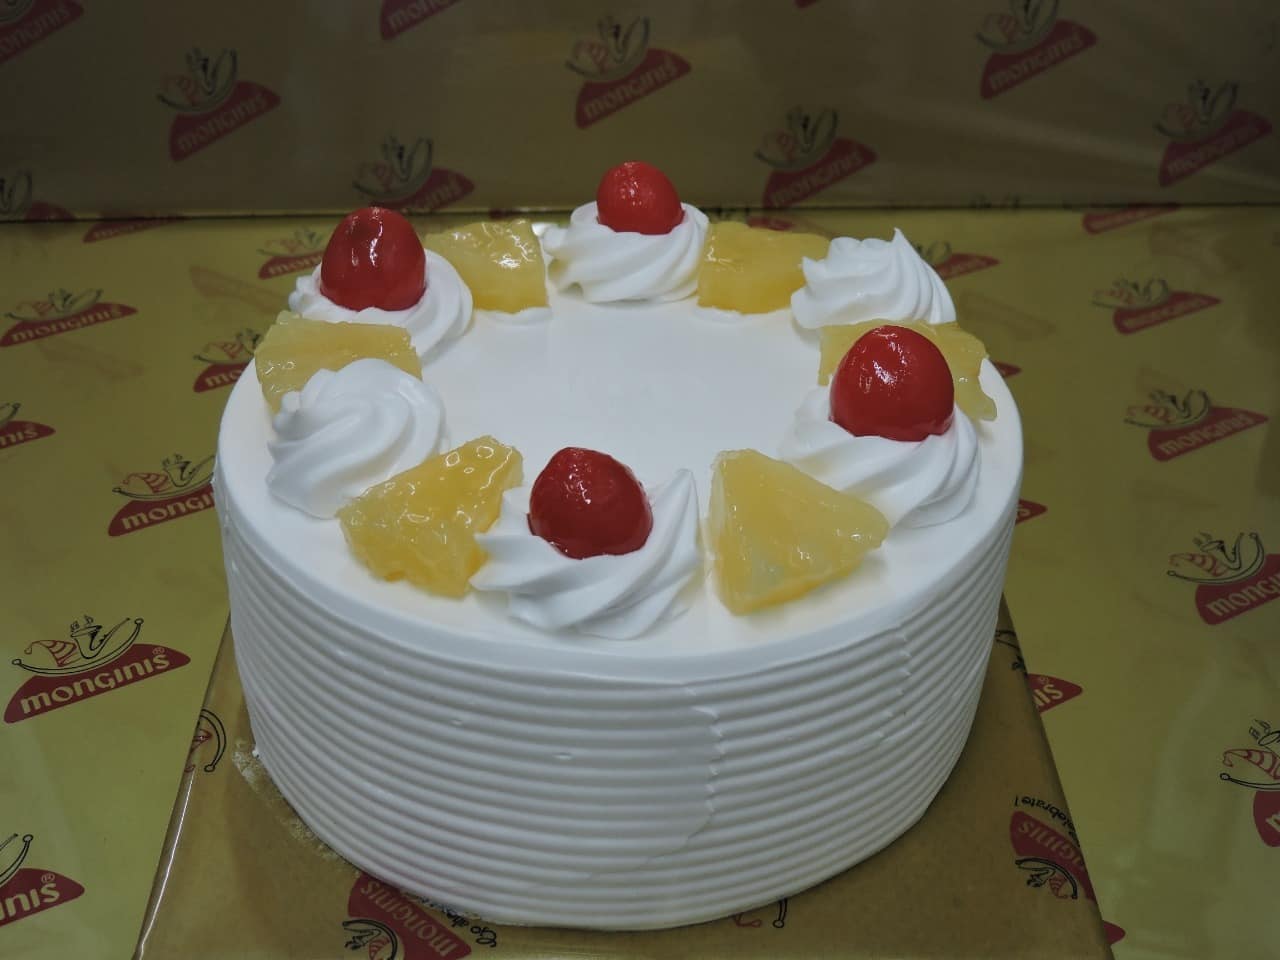 White Forest Cake 500gm